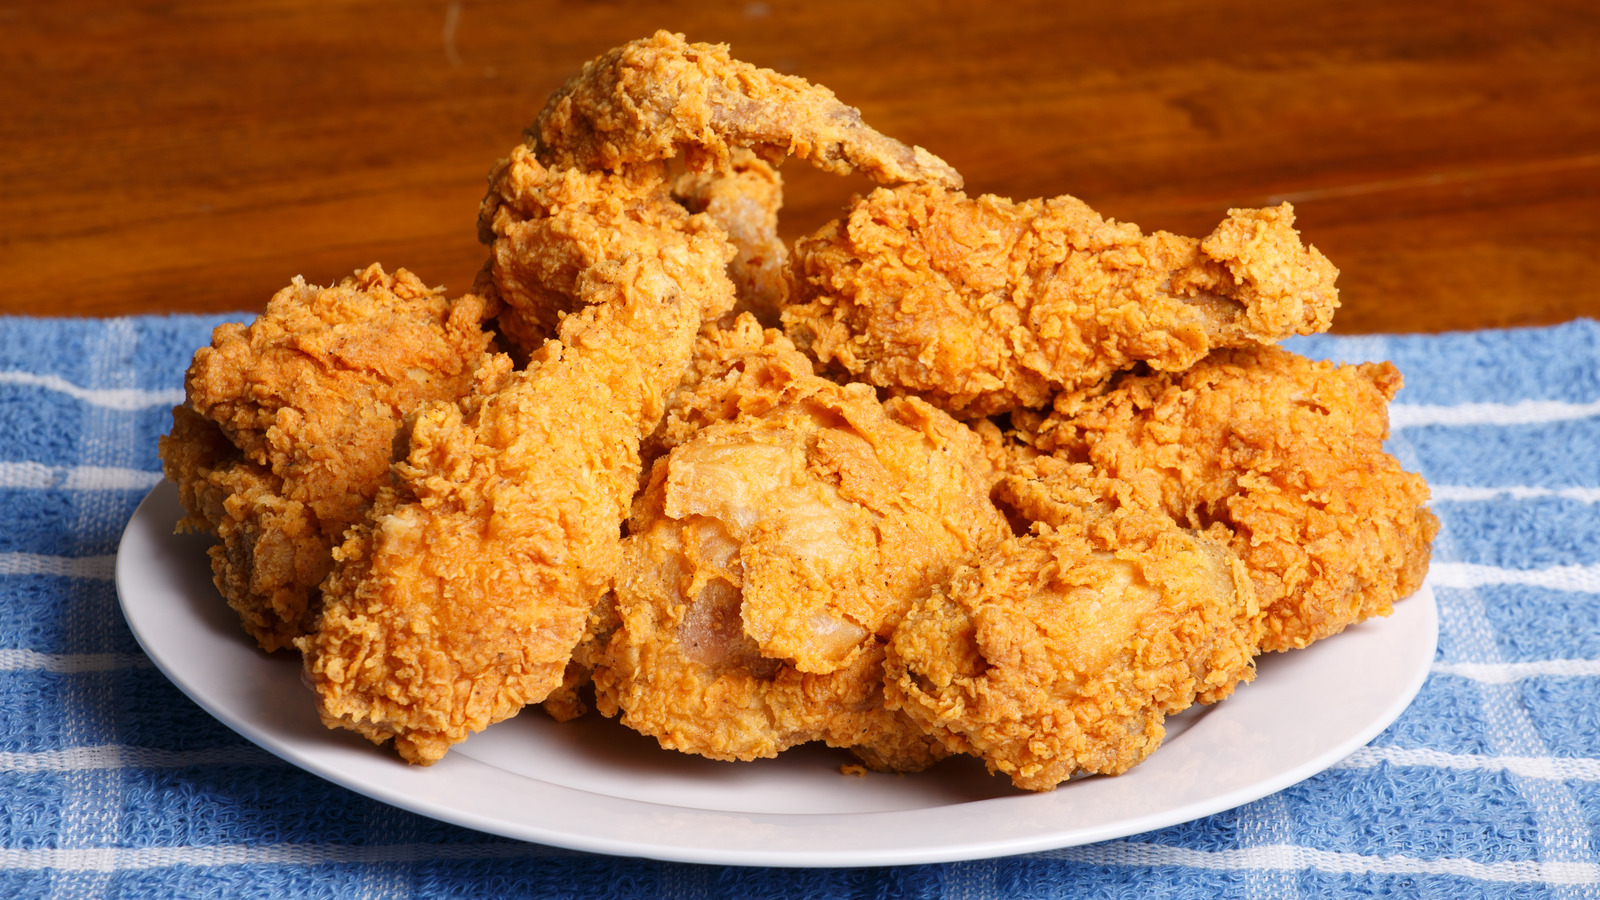 Get your mitts on some of this crispy crunchy 'Not Fried Chicken